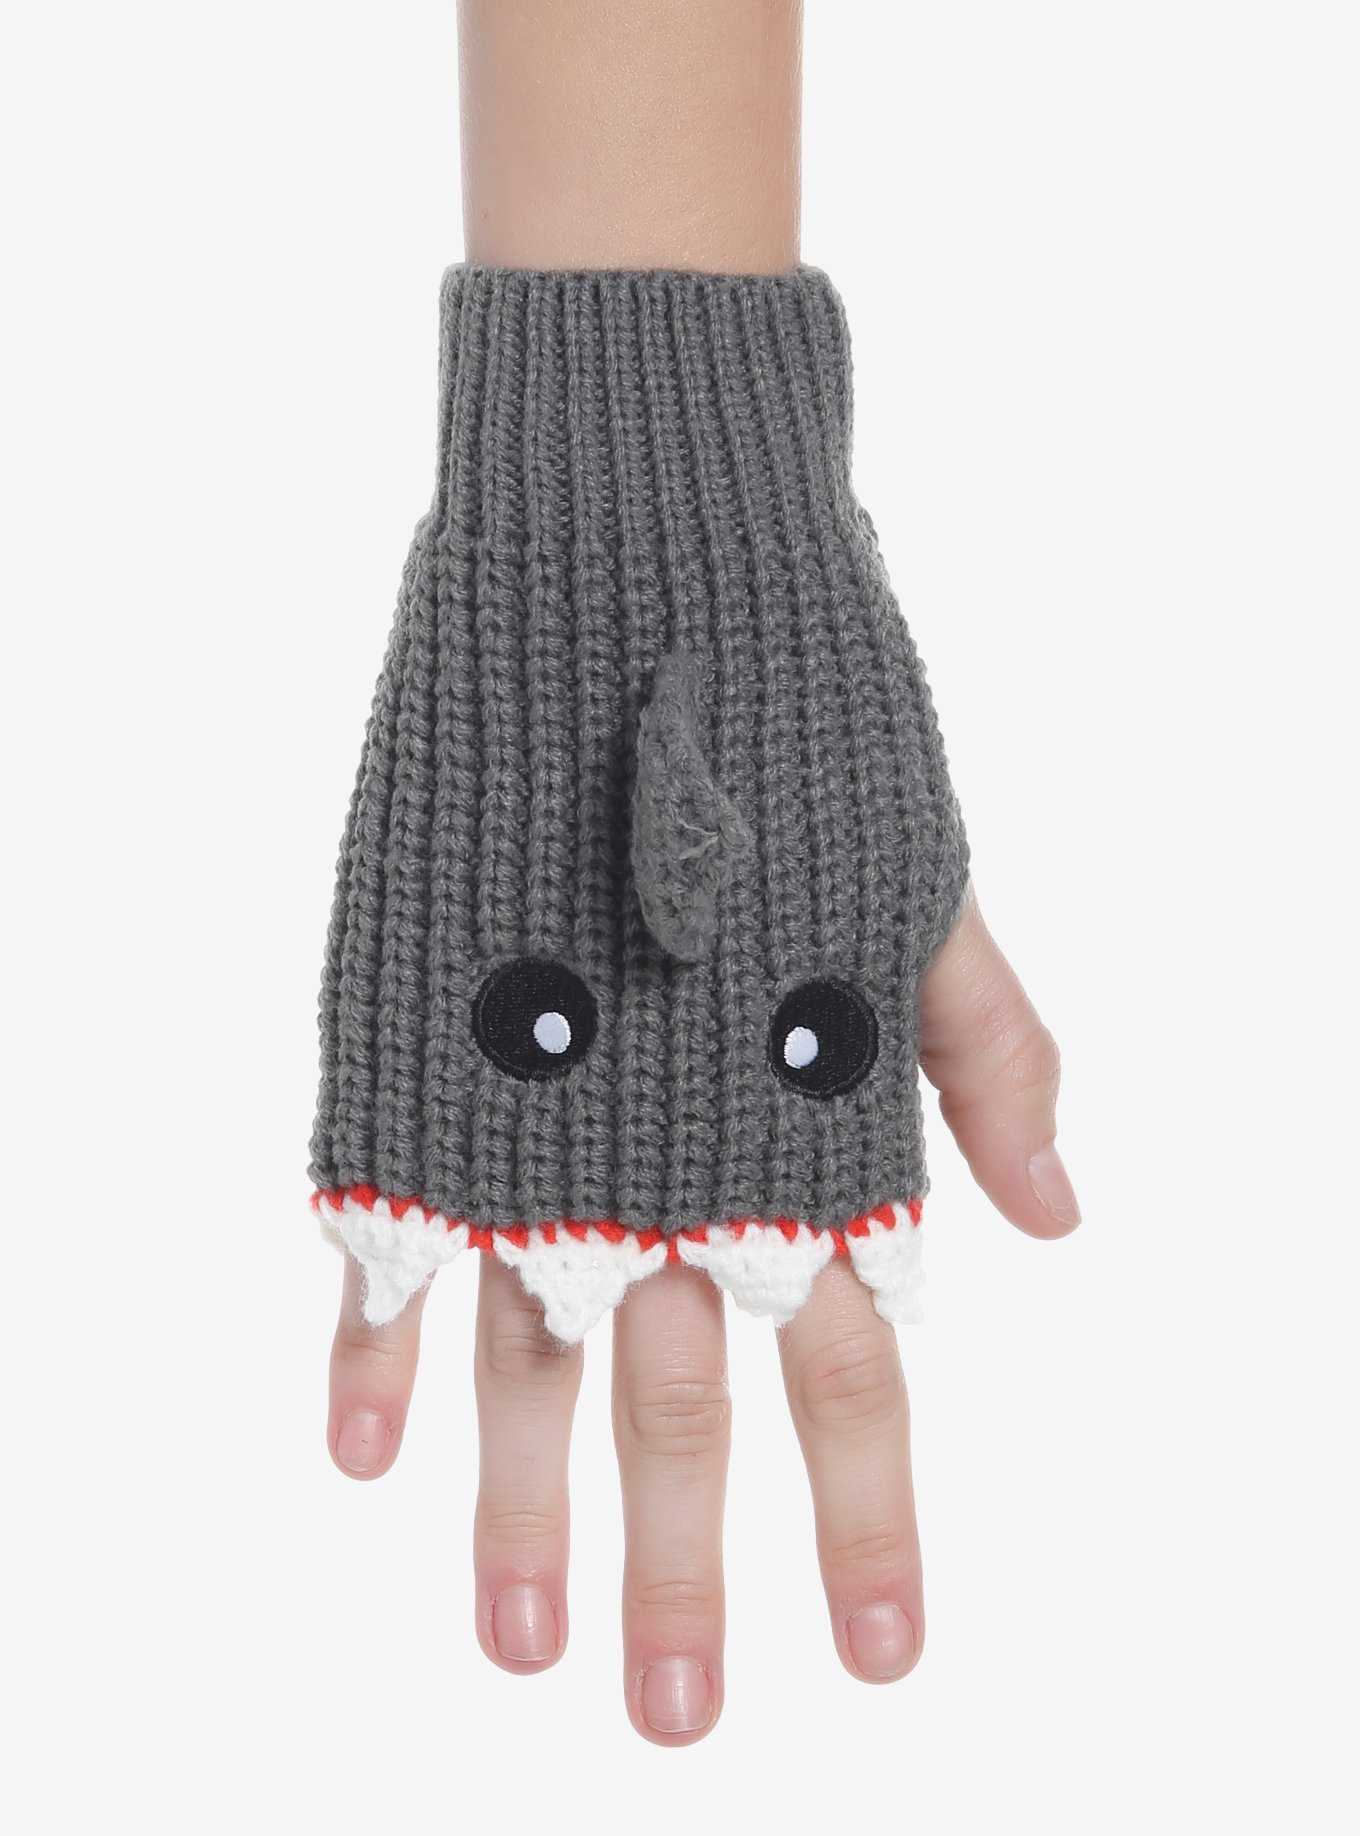 Grey Fingerless Gloves, Long Arm Warmers, Wrist Warmers, Texting Gloves, Yoga  Gloves, Arm Sleeve Tattoo Cover up Wrist Cover Christmas Gift 